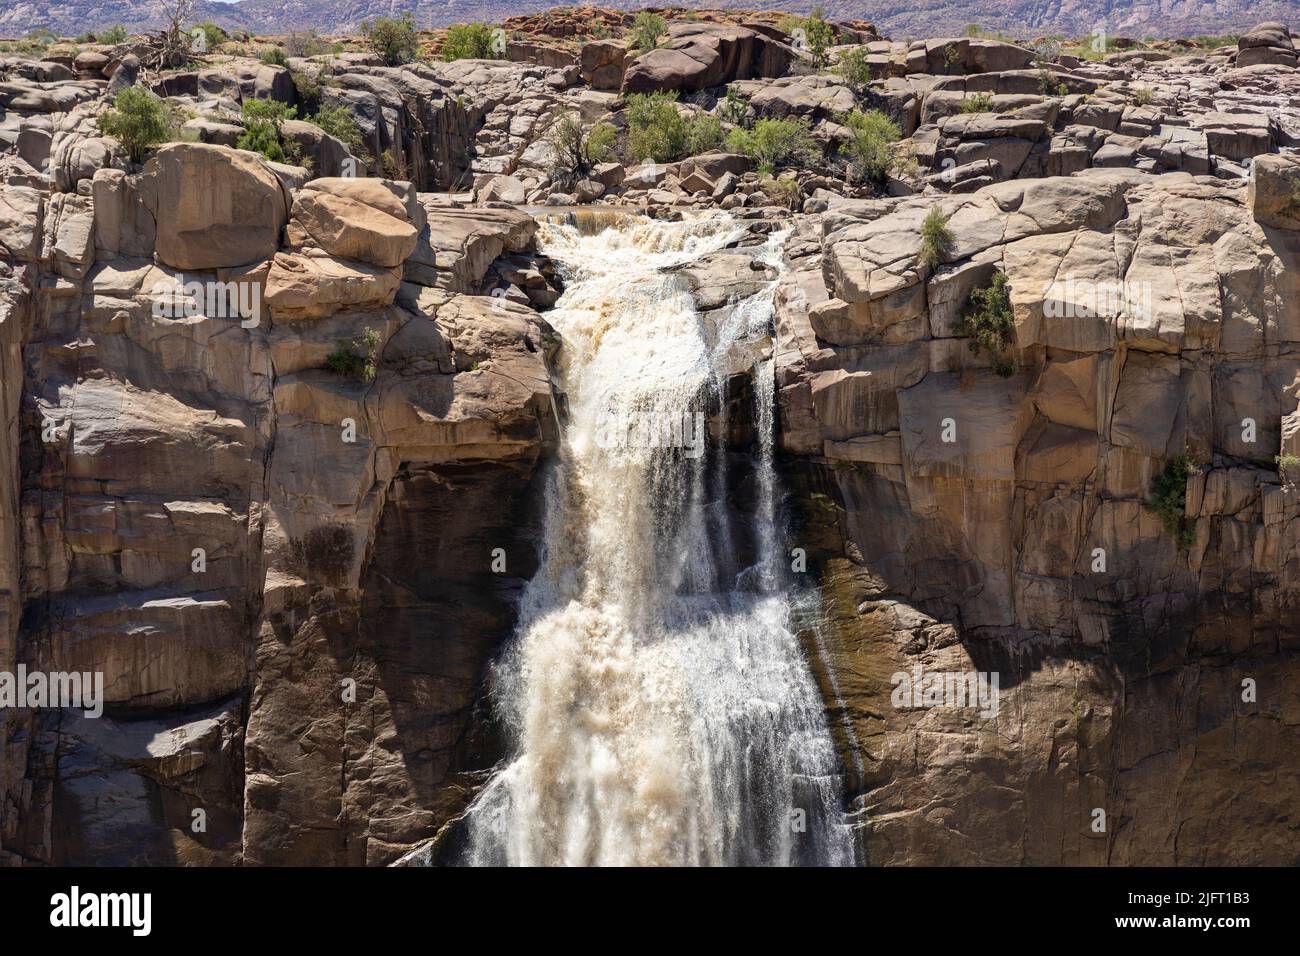 Top part of the smaller waterfall at the Augrabies waterfall in the Northern Cape Province of South Africa Stock Photo